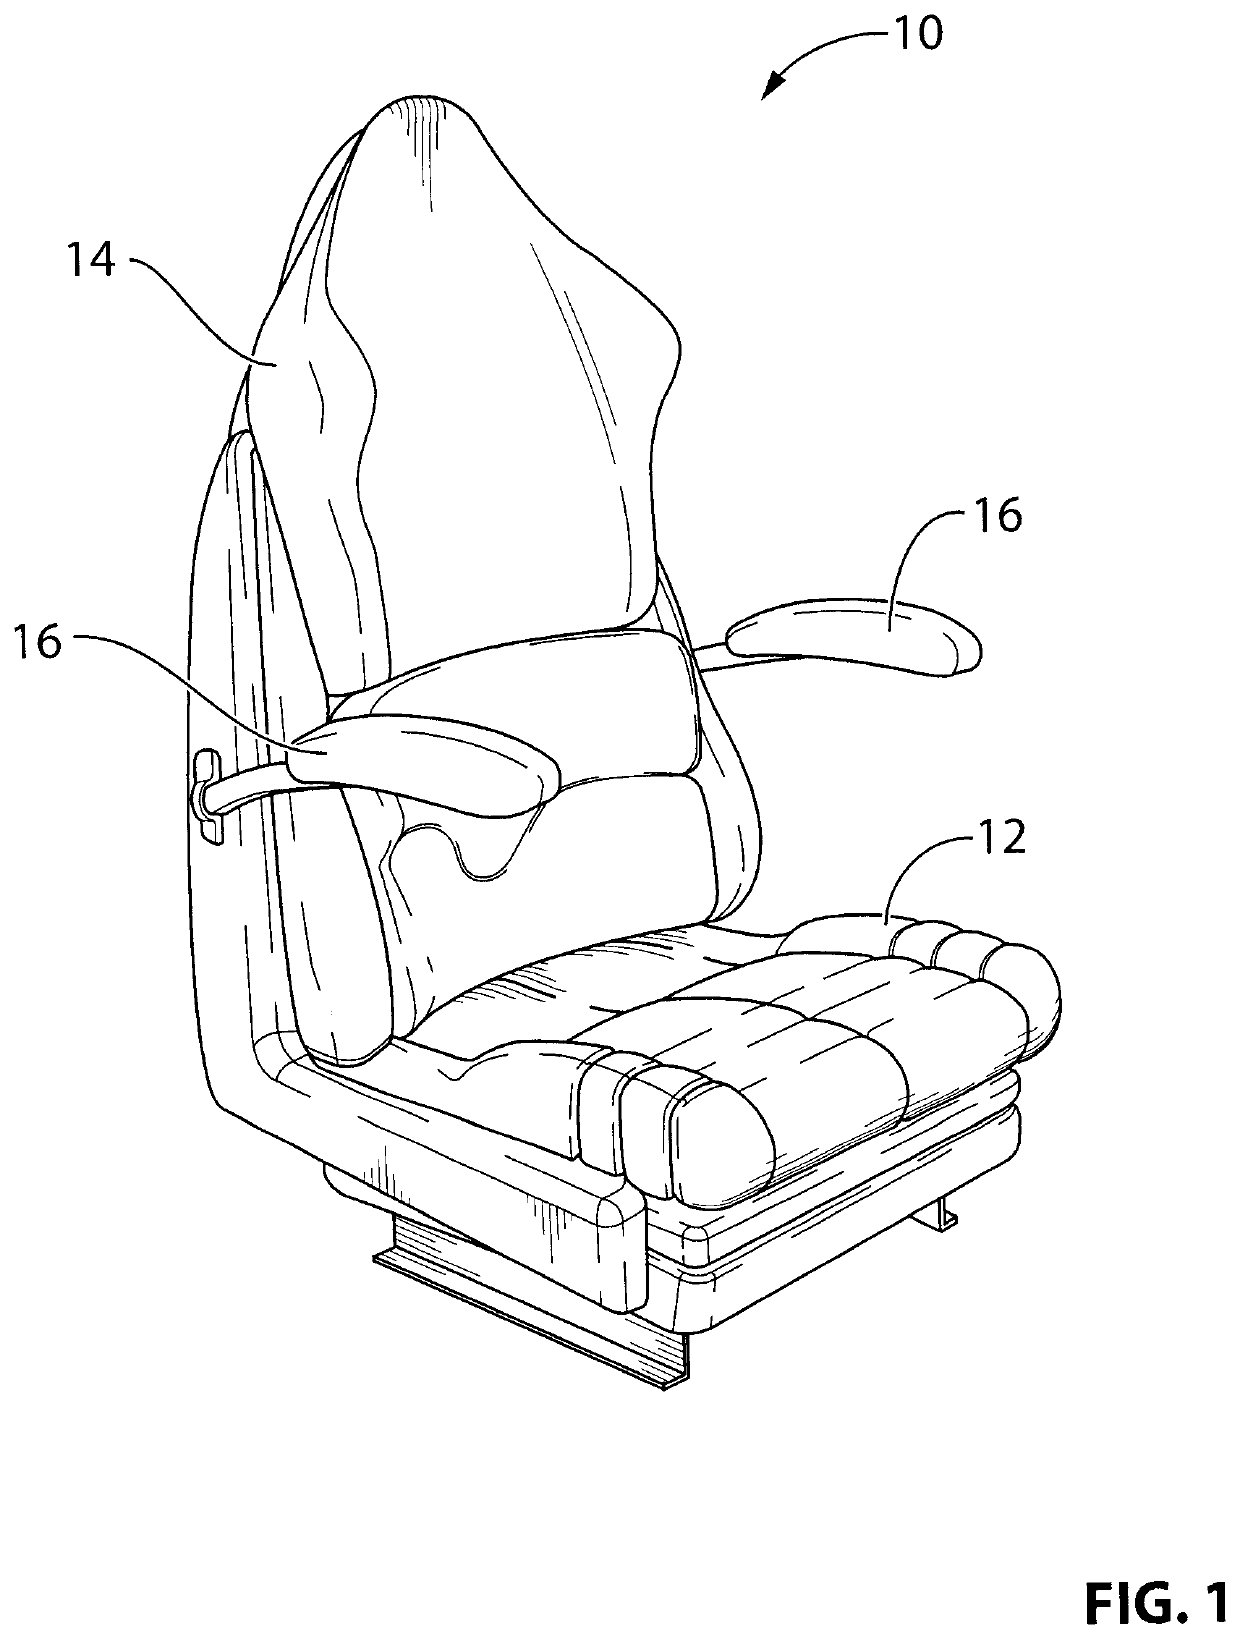 Adjustable seating systems and associated structures